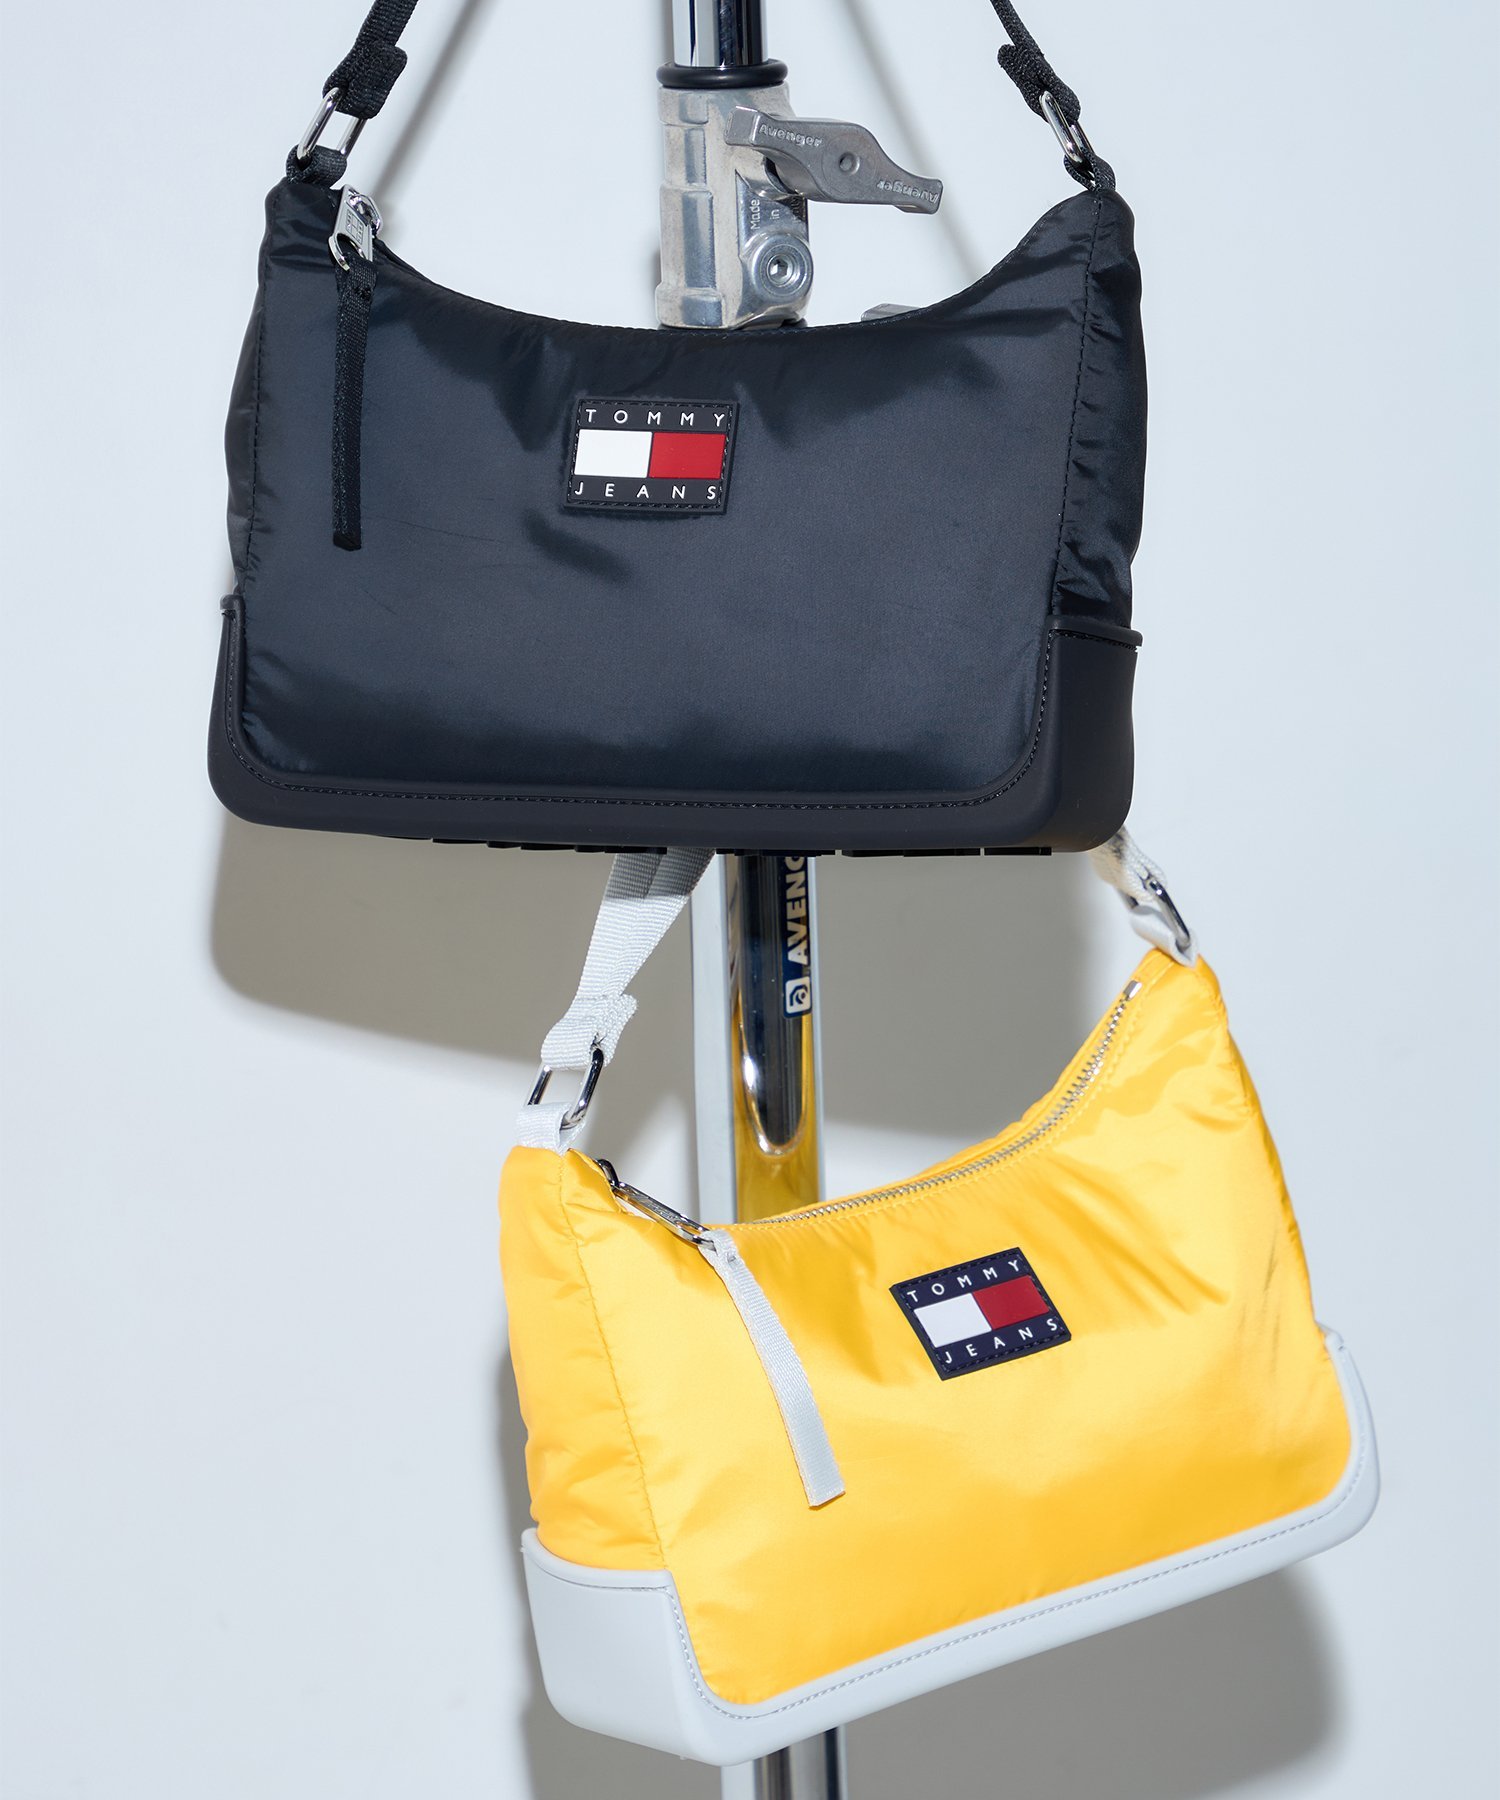 【SALE／20%OFF】TOMMY JEANS 【オンライン限定】TJショルダーバッグ トミーヒルフィガー バッグ ショルダーバッグ ネイビー イエロー【送料無料】